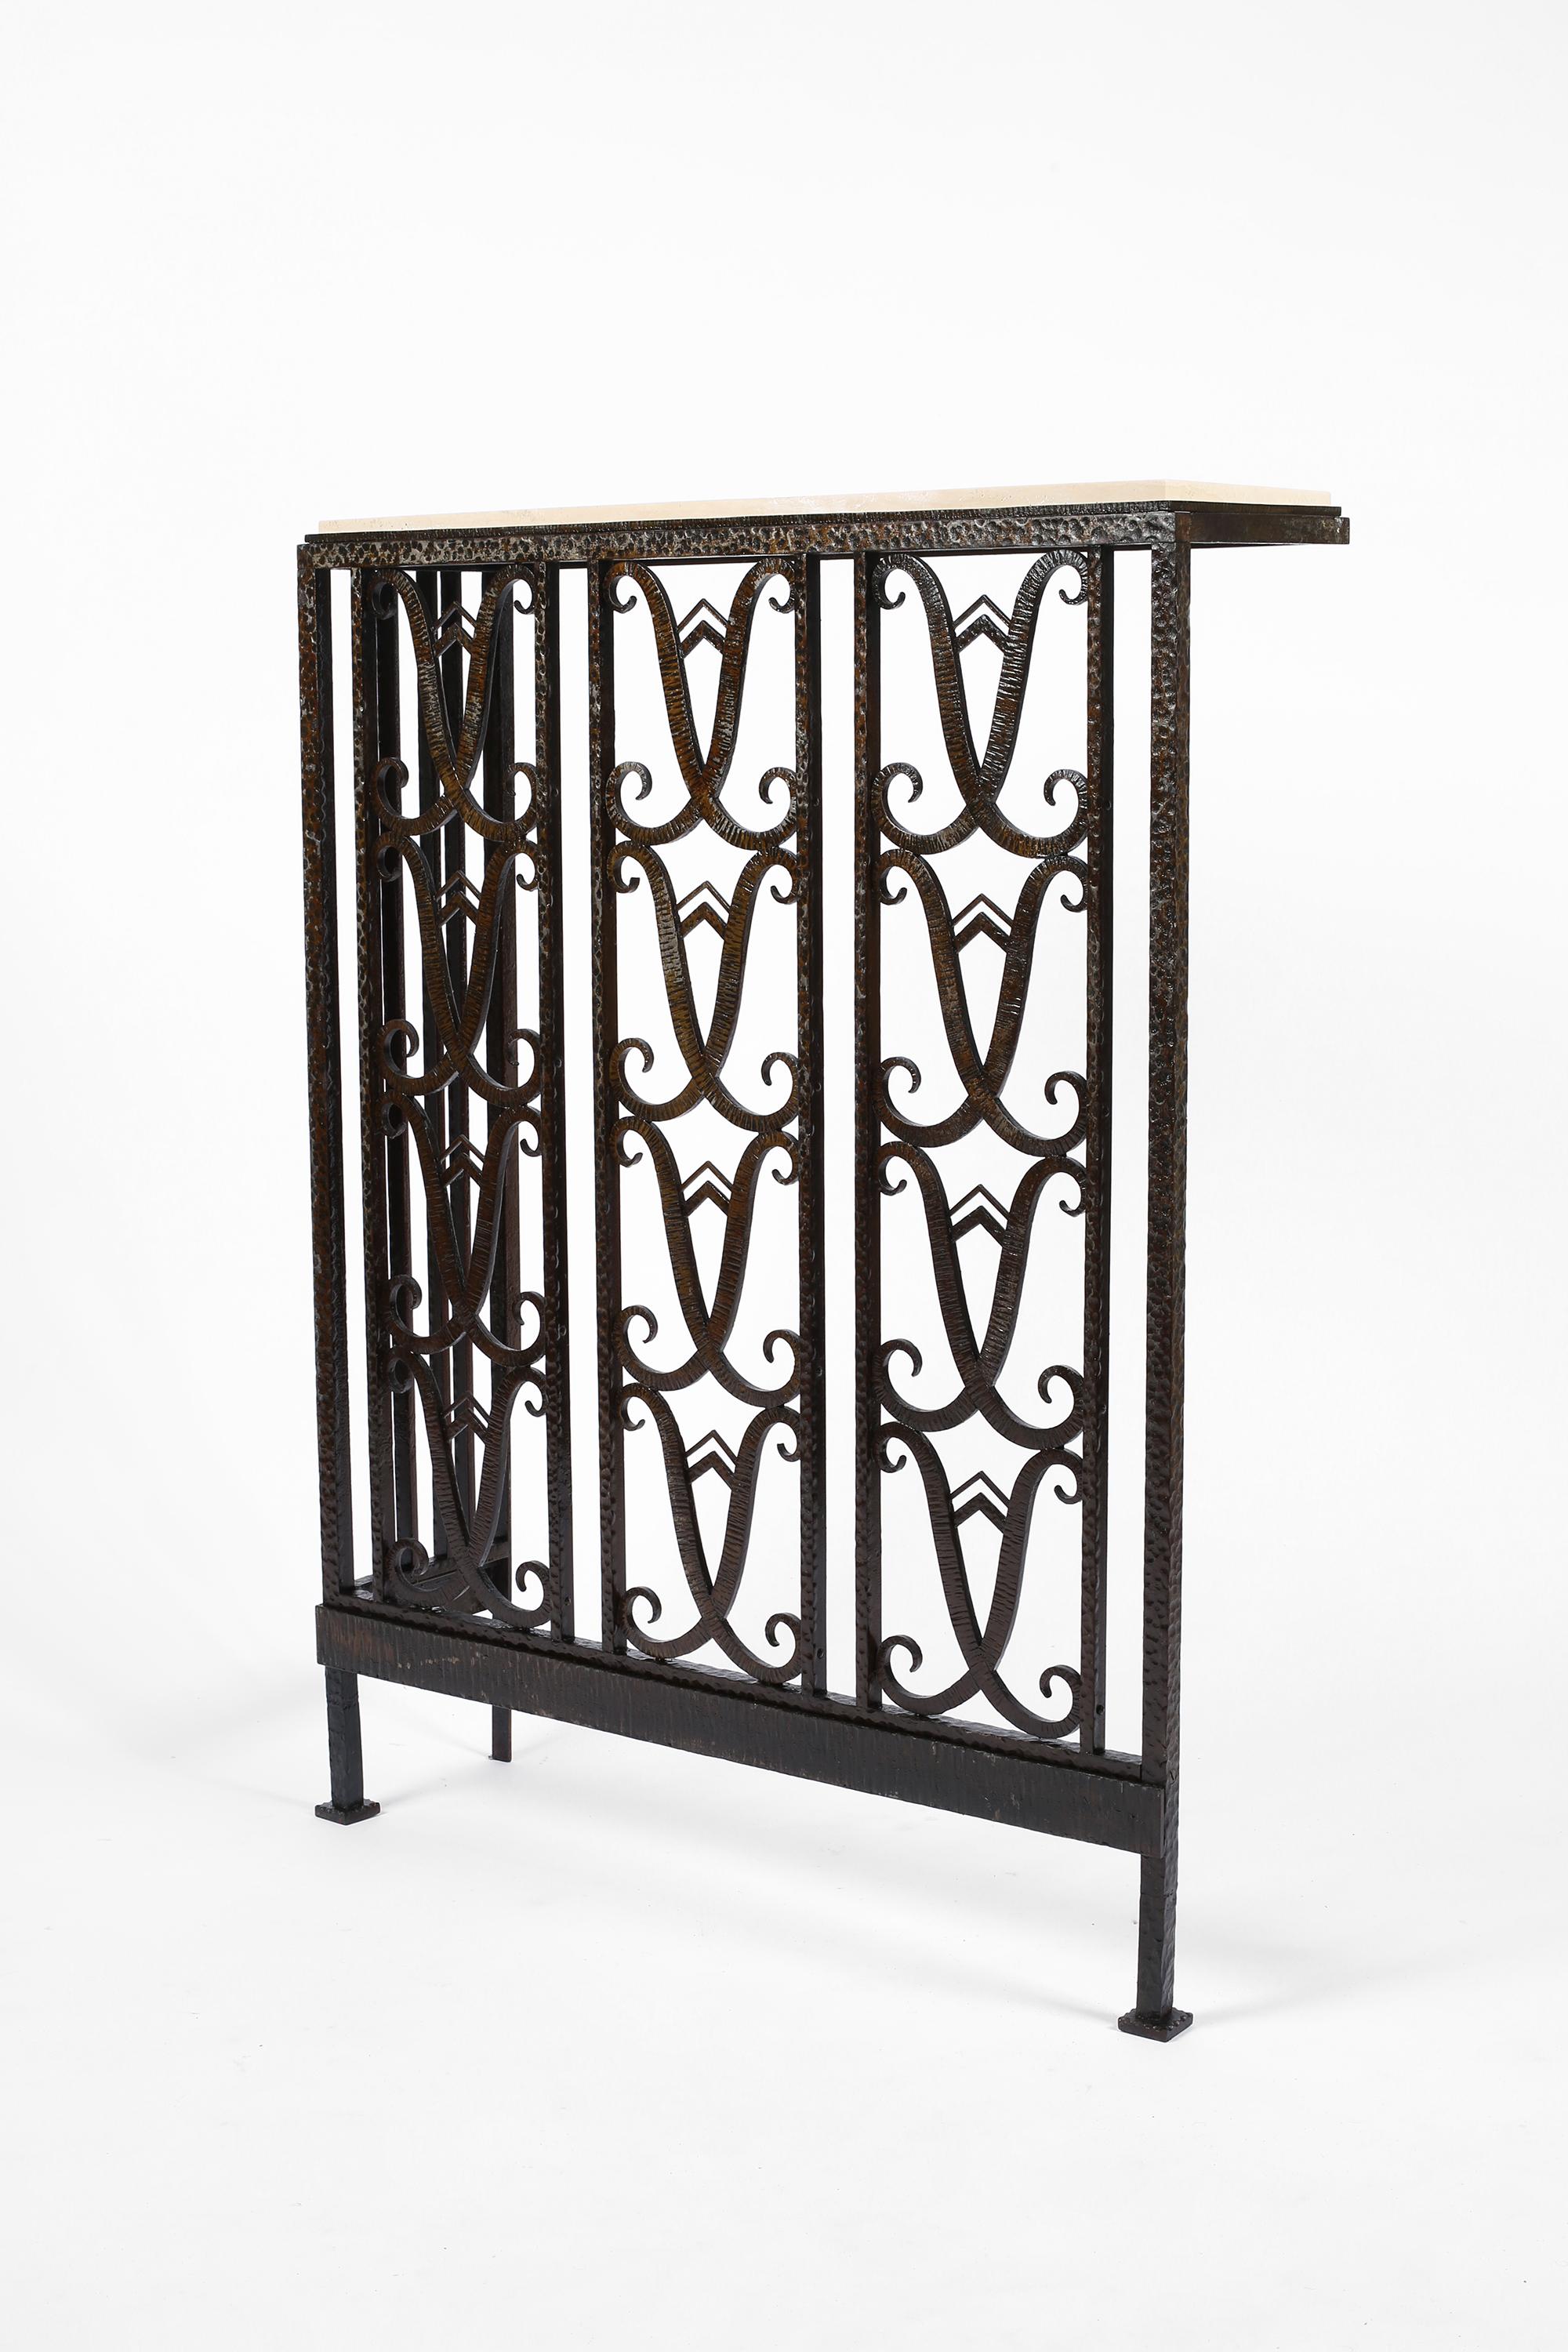 French Art Deco Forged Iron and Limestone Corner Console Table Radiator Cover For Sale 6